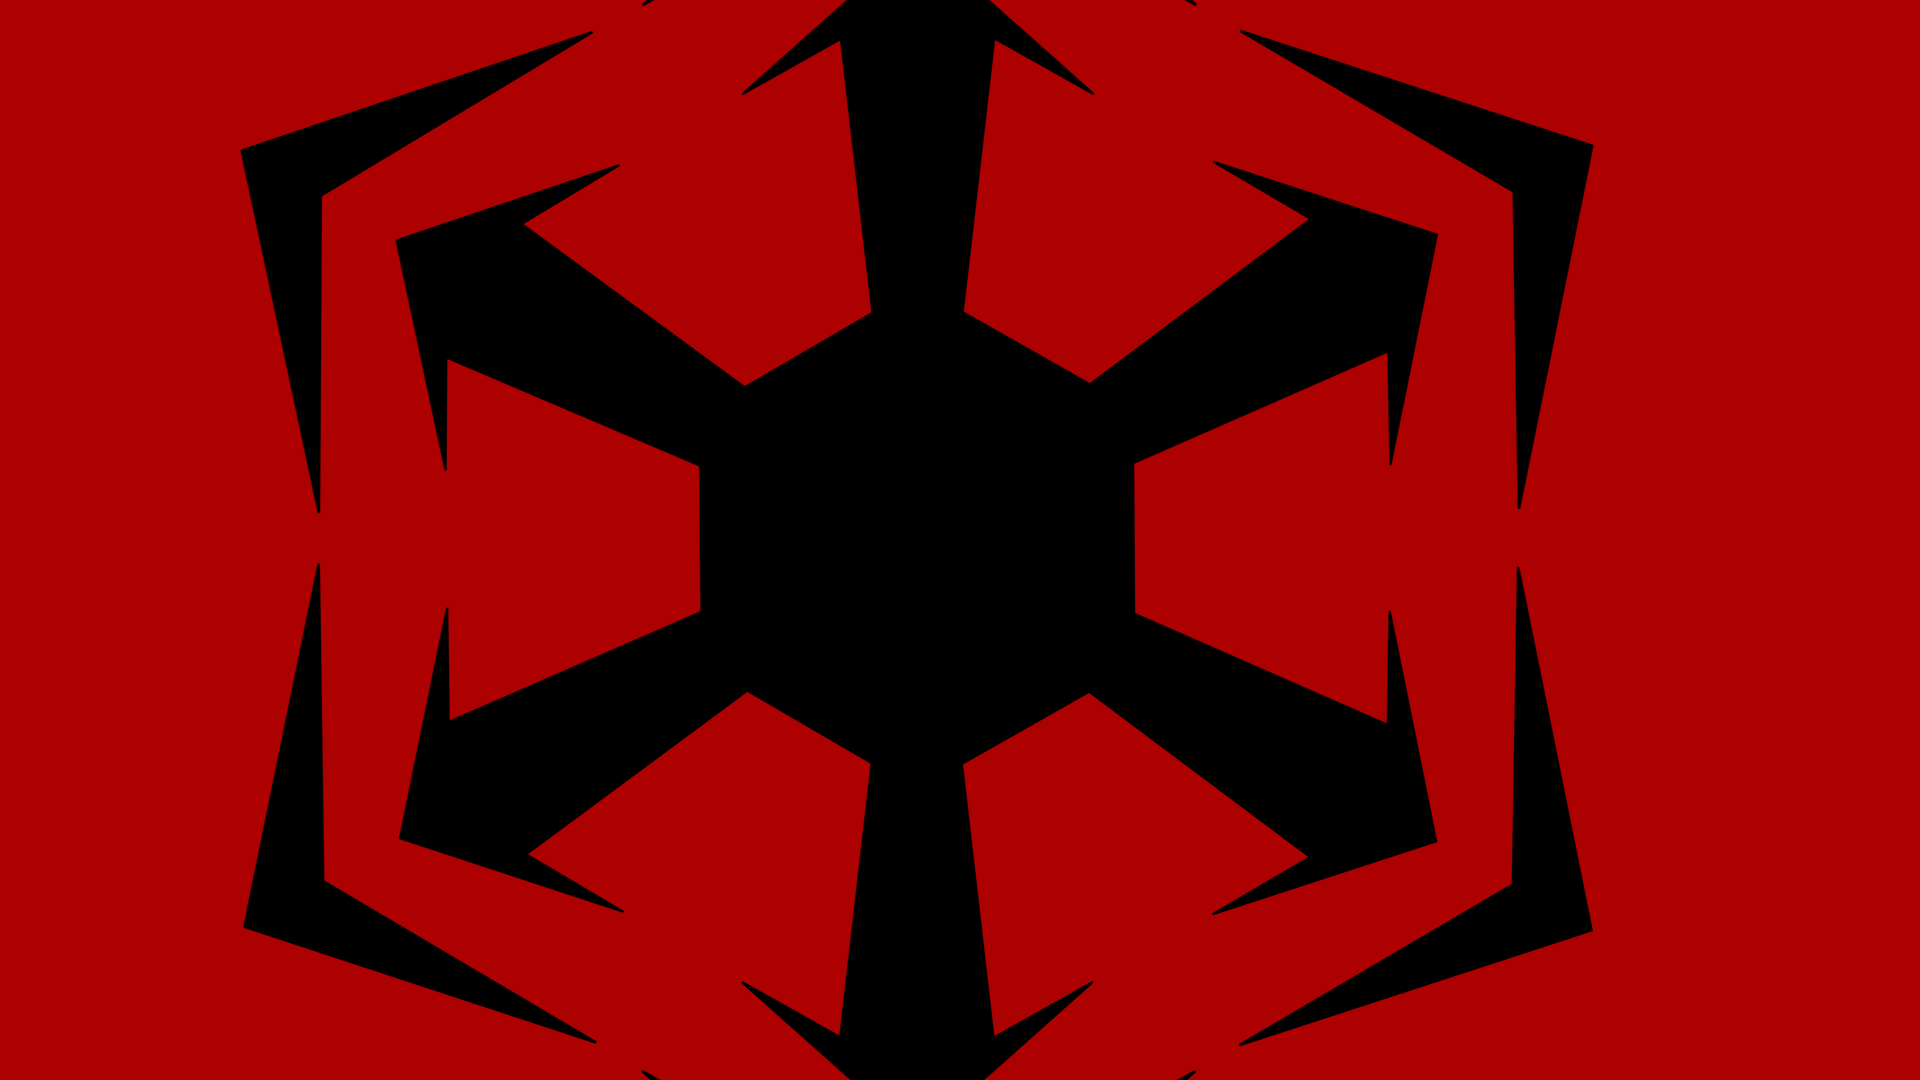 Star Wars: Knights of the Old Republic II: The Sith Lords, Knights of the Old Republic, Star Wars, red background, logo, Sith, PC gaming, video games HD Wallpaper